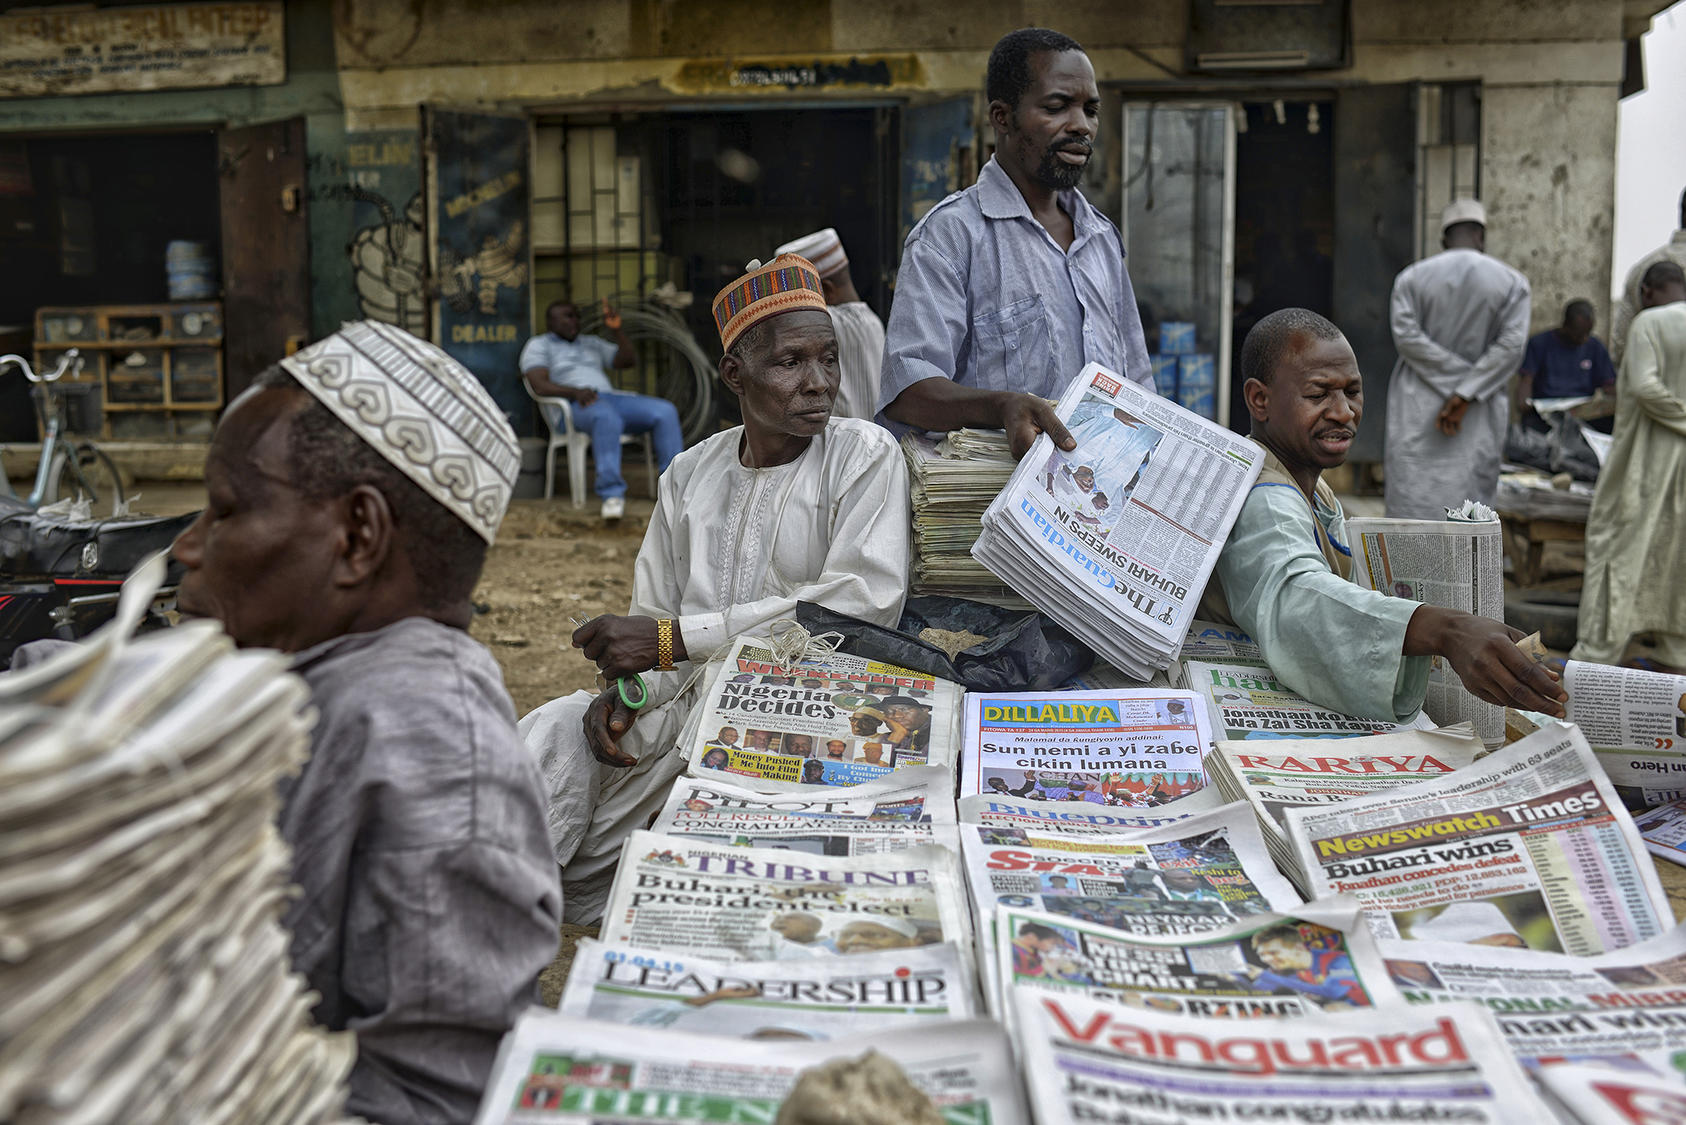 Newspaper vendors a day after election results in Kano, northern Nigeria, April 1, 2015.